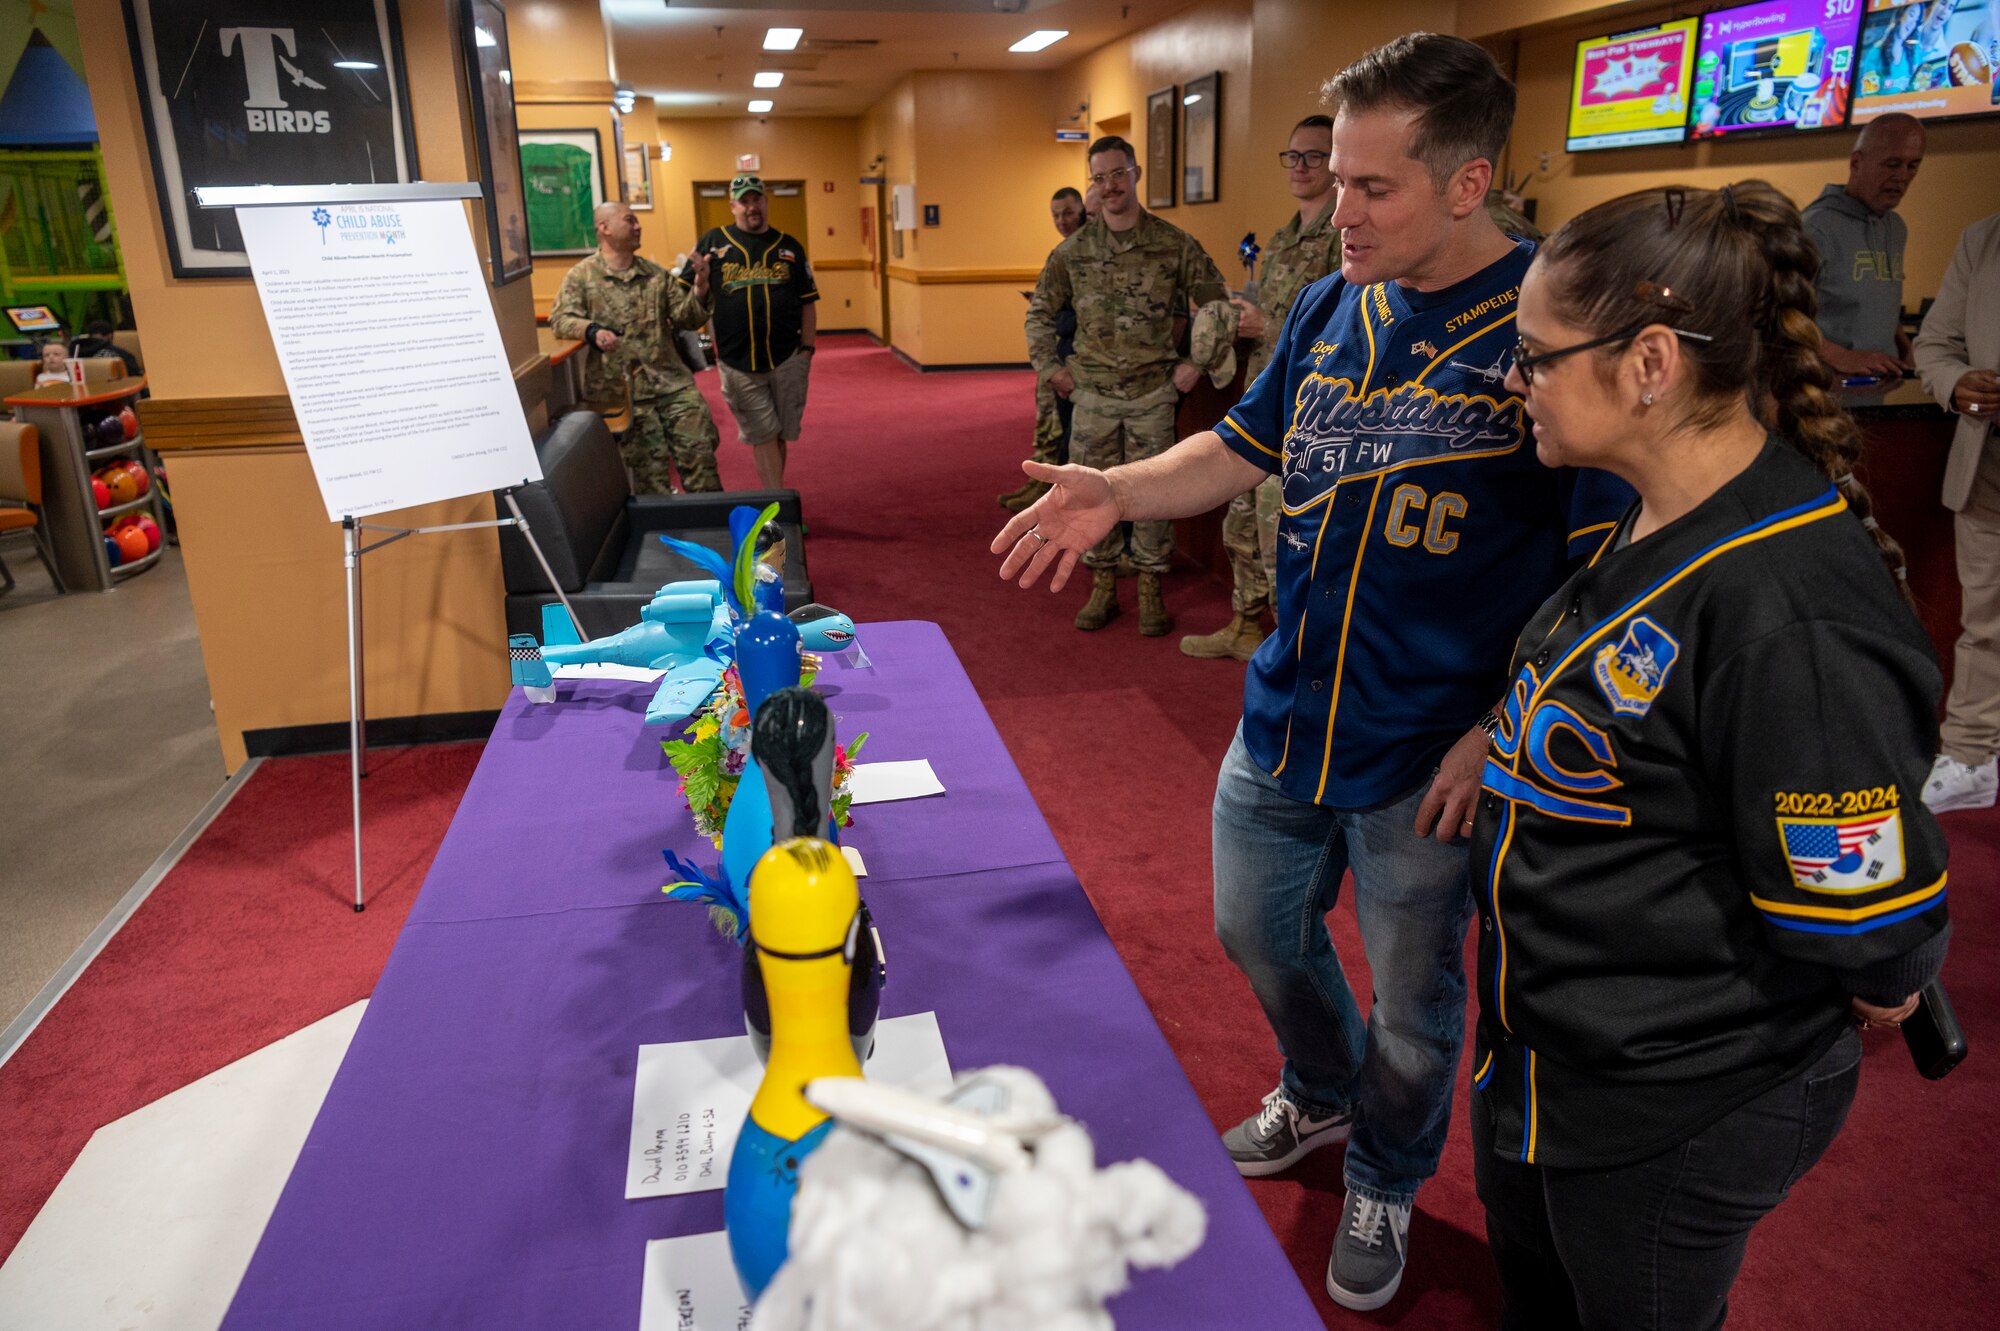 U.S. Air Force Col. Joshua Wood, 51st Fighter Wing commander, and Chief Master Sgt. Lisa Thrasher-Stallard, 51st Medical Group command chief, inspect submissions as judges to the bowling pin decoration contest at Osan Air Base, Republic of Korea, April 7, 2023. The contest was held in observance of National Child Abuse Prevention Month. (U.S. Air Force photo by Airman 1st Class Aaron Edwards)